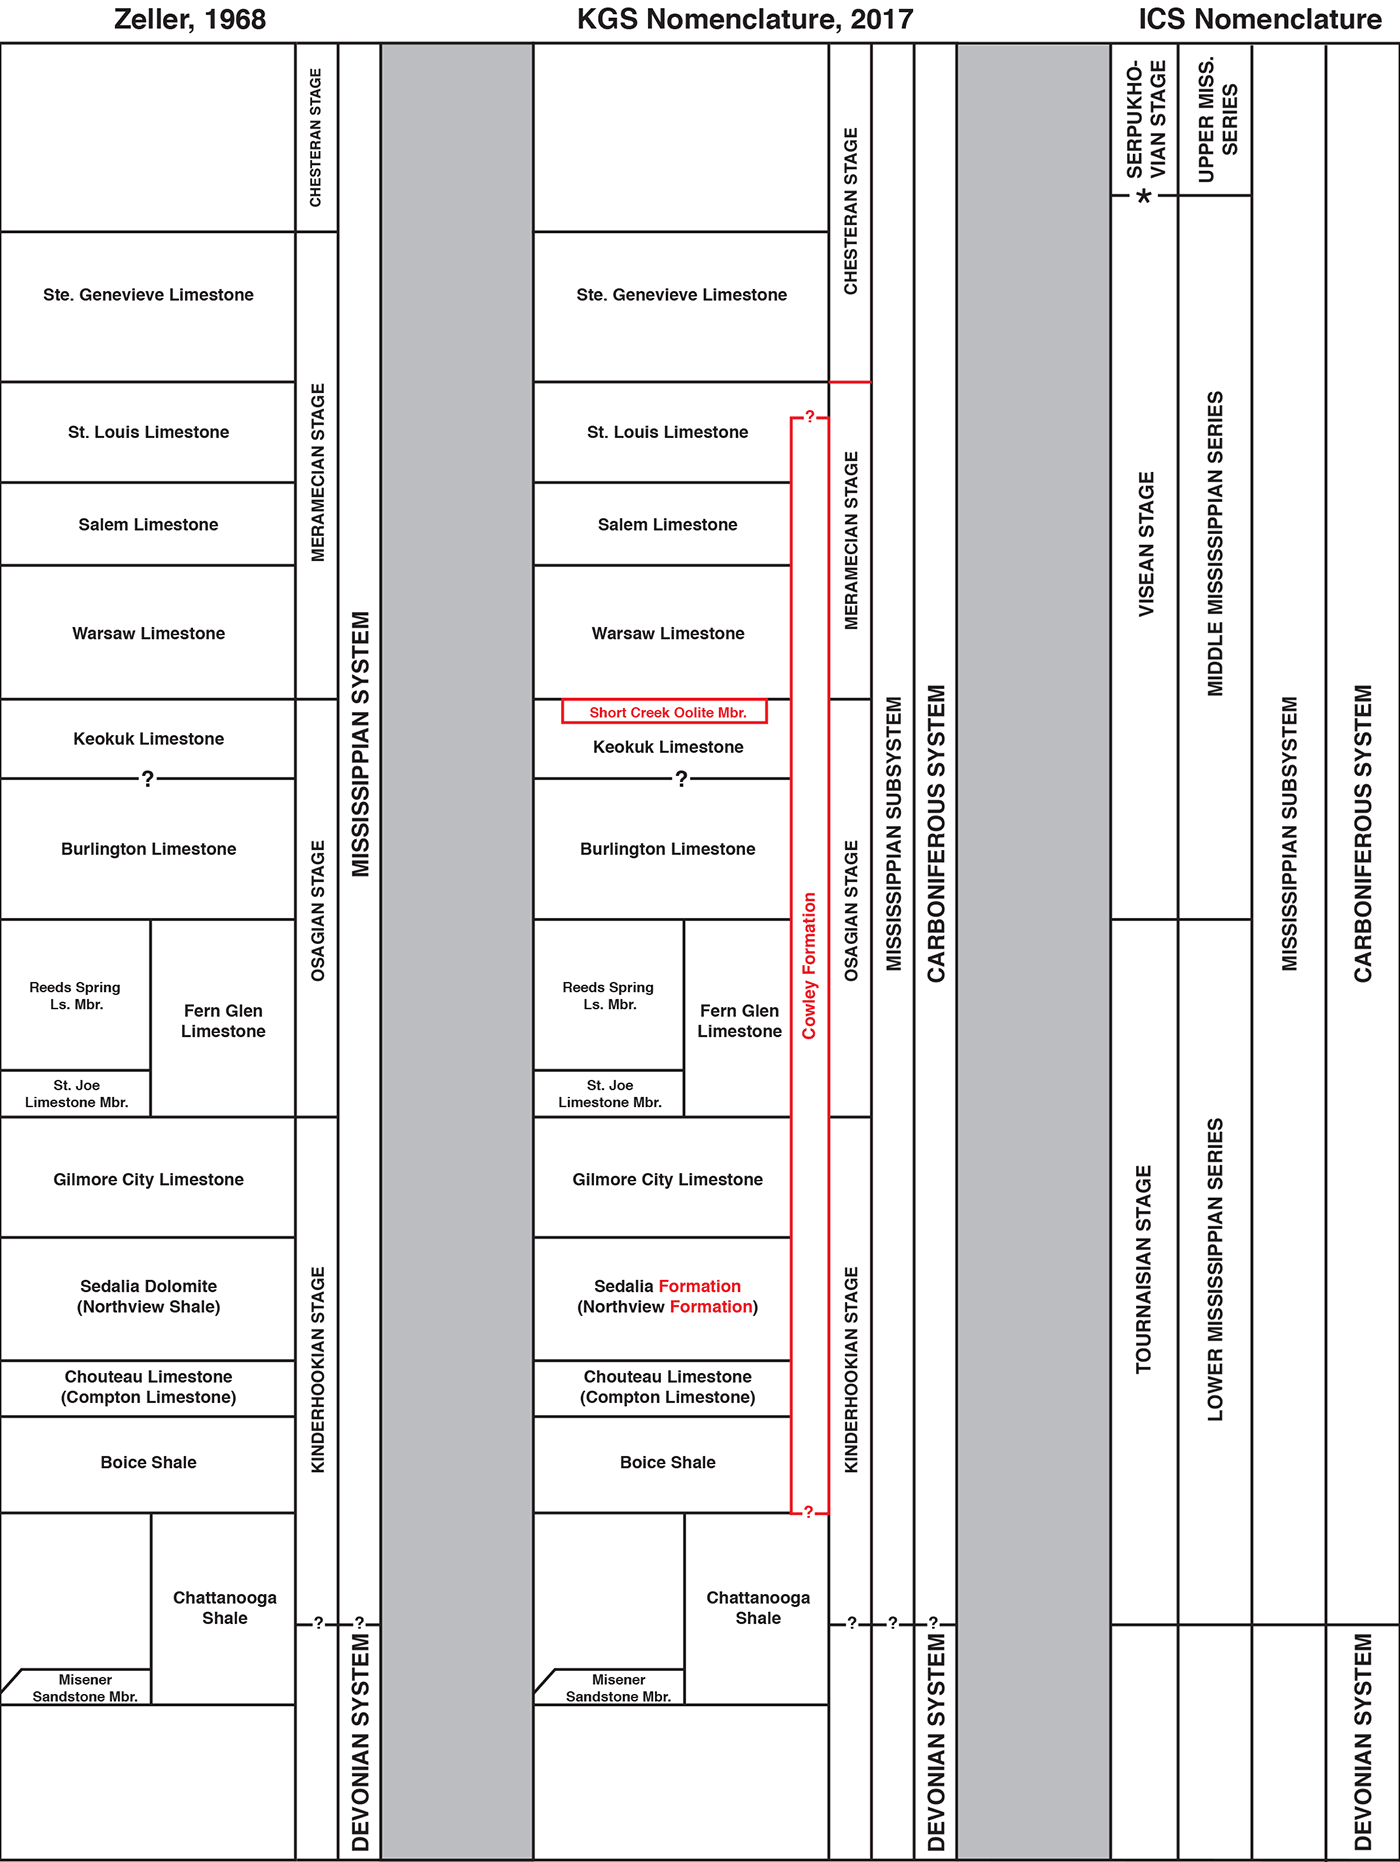 Mississippian nomenclature changes to Zeller (1968) that are formally adopted by the KGS.